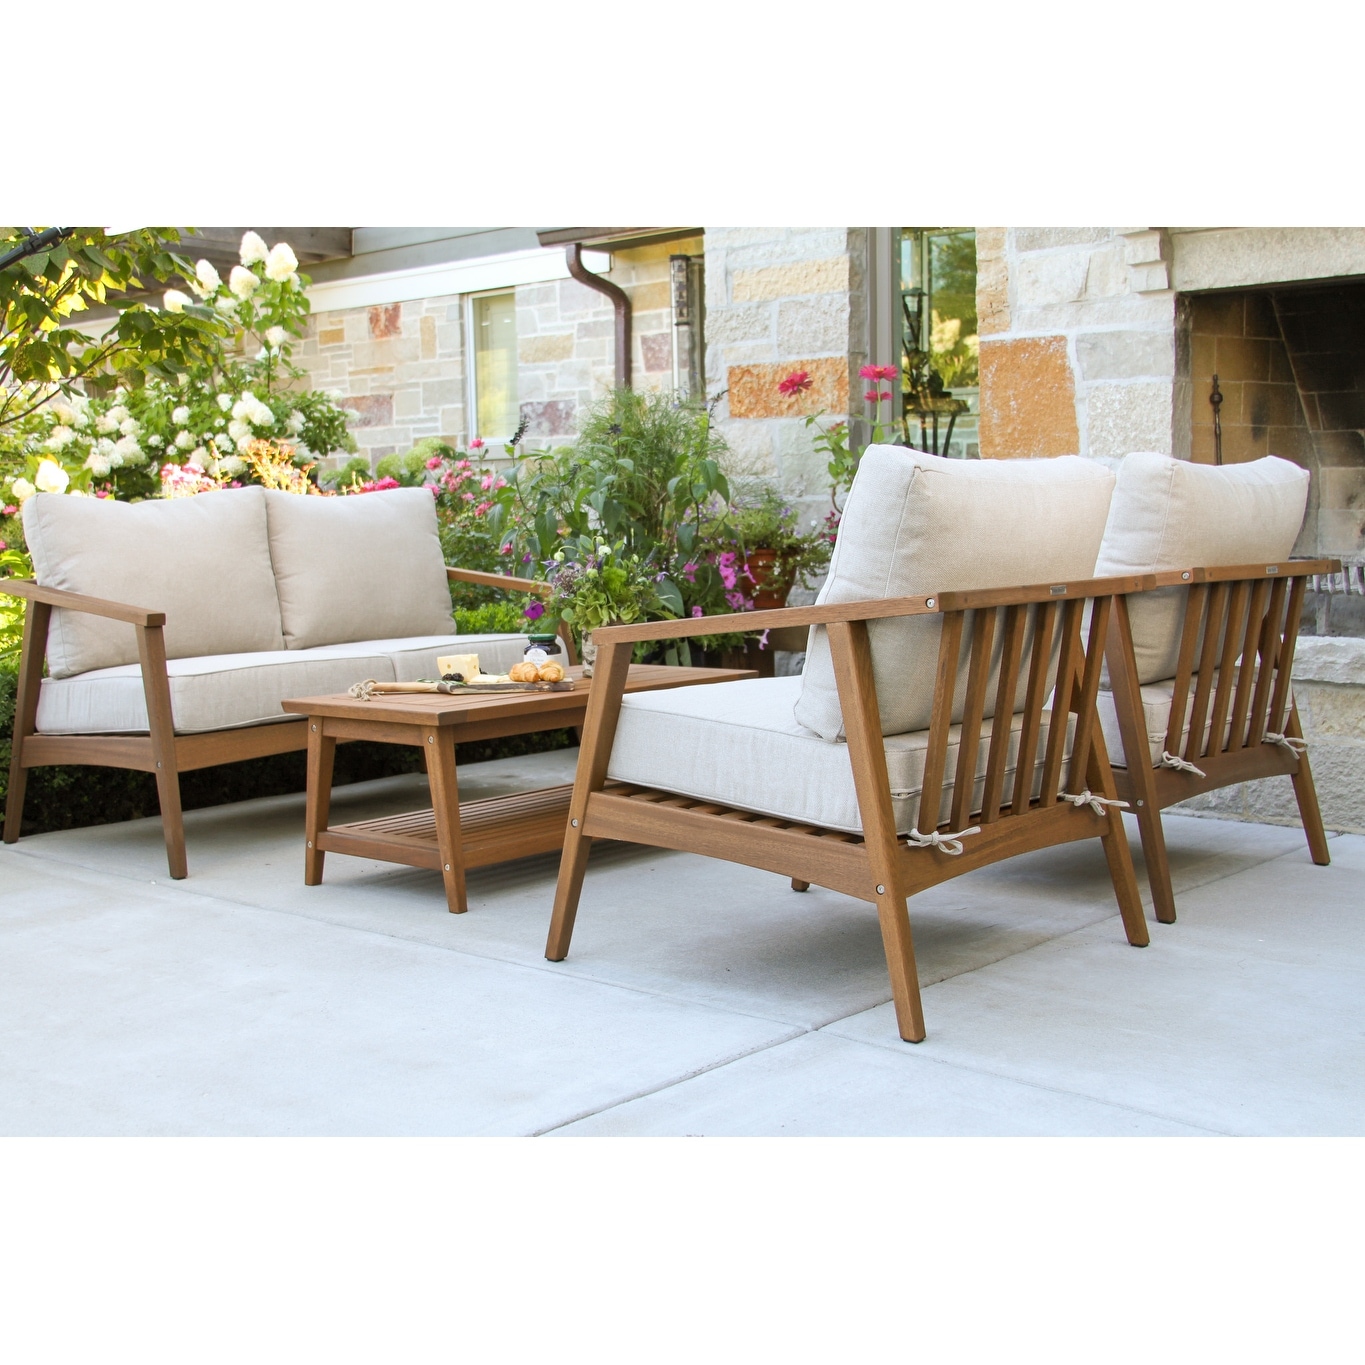 Eilaf 4 Pc. Eucalyptus Seating Group